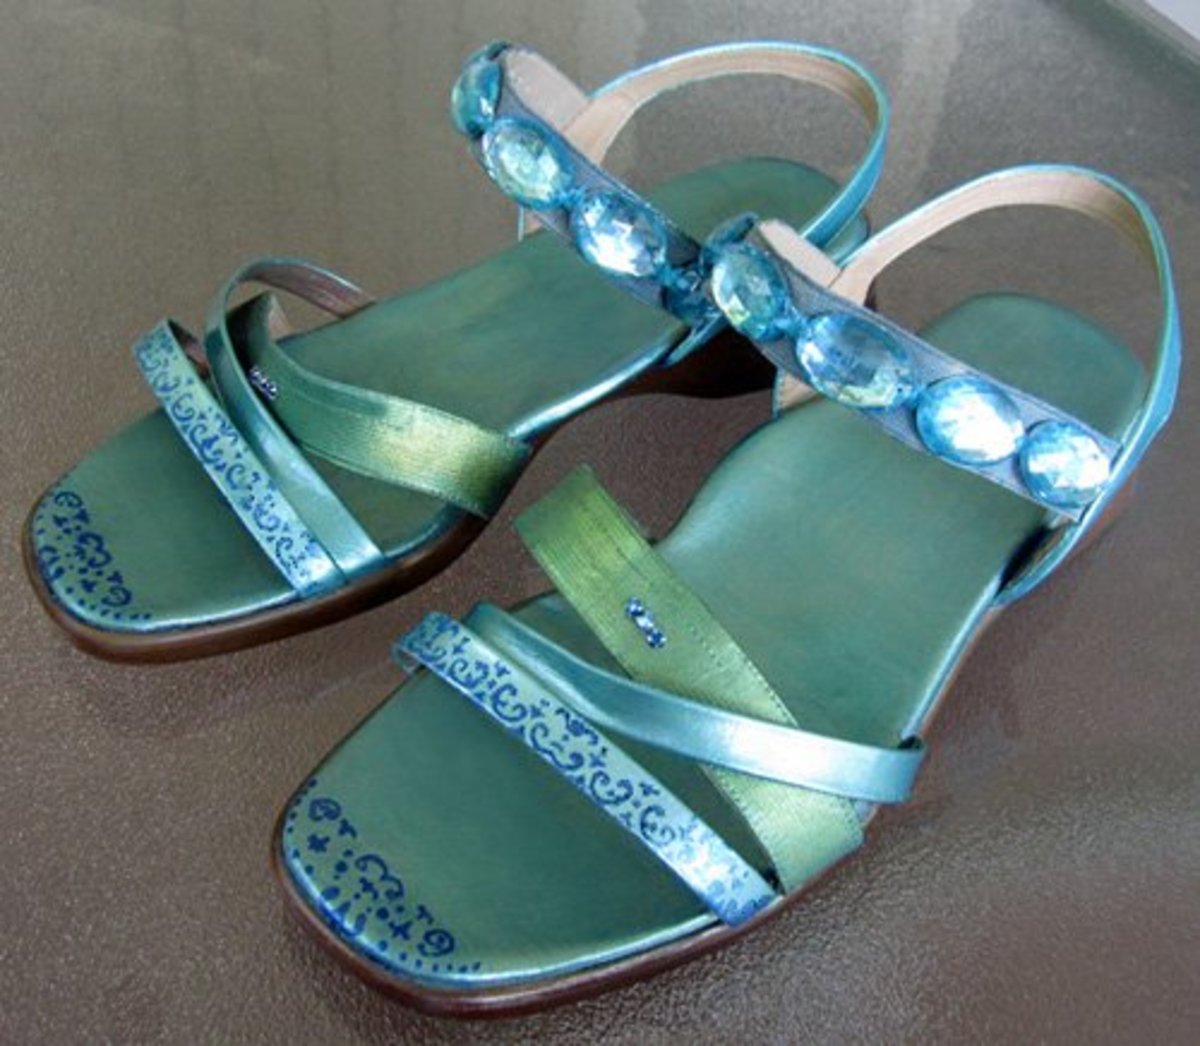 Ta-da! Don't the finished sandals look cool? 